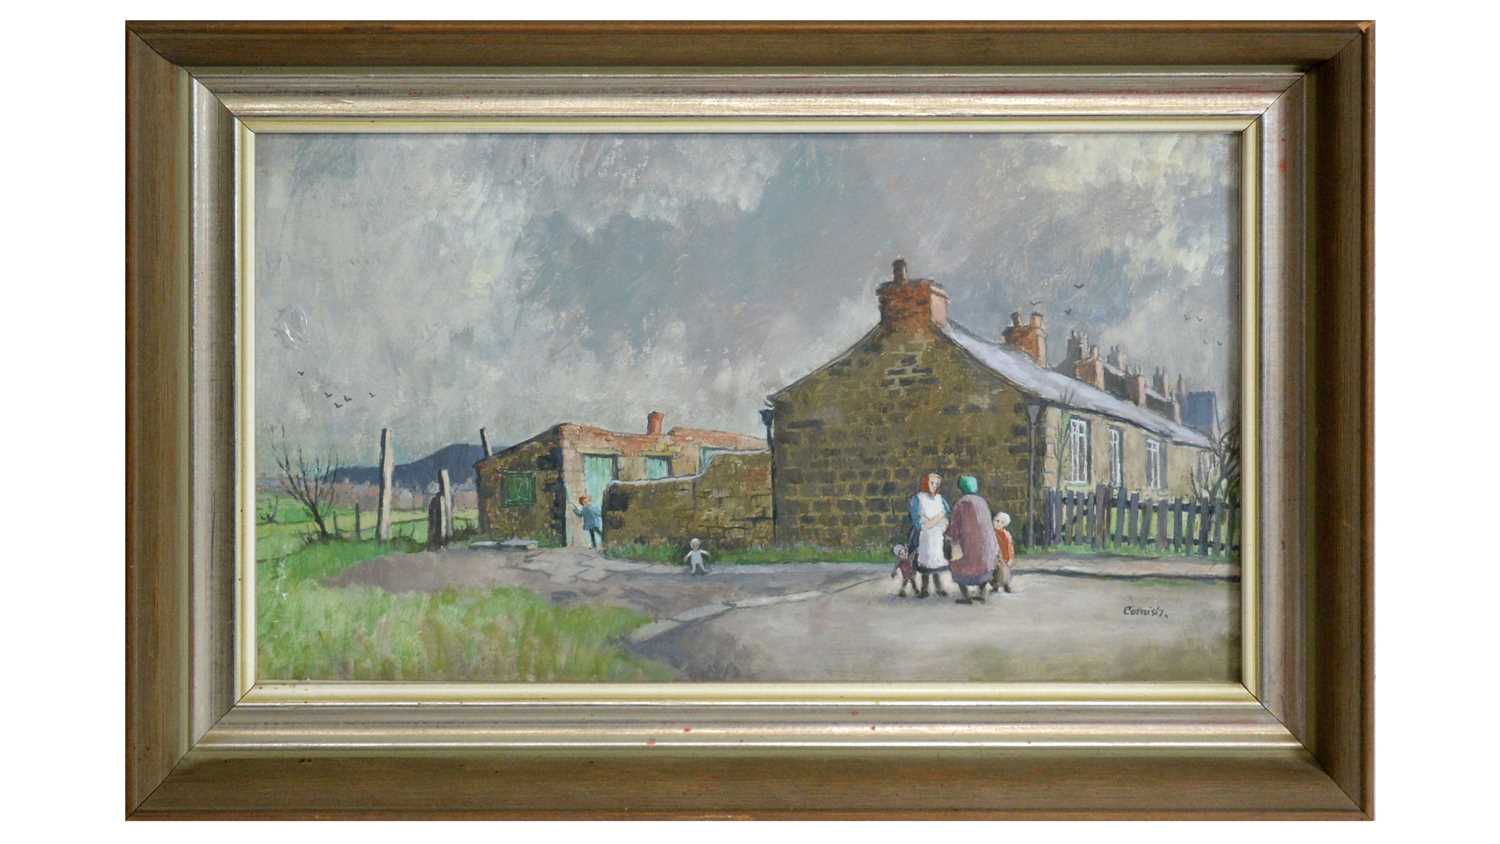 Lot 572 - Norman Cornish - Old Cottages Tudhoe Village, Tudhoe Colliery in the Distance | oil